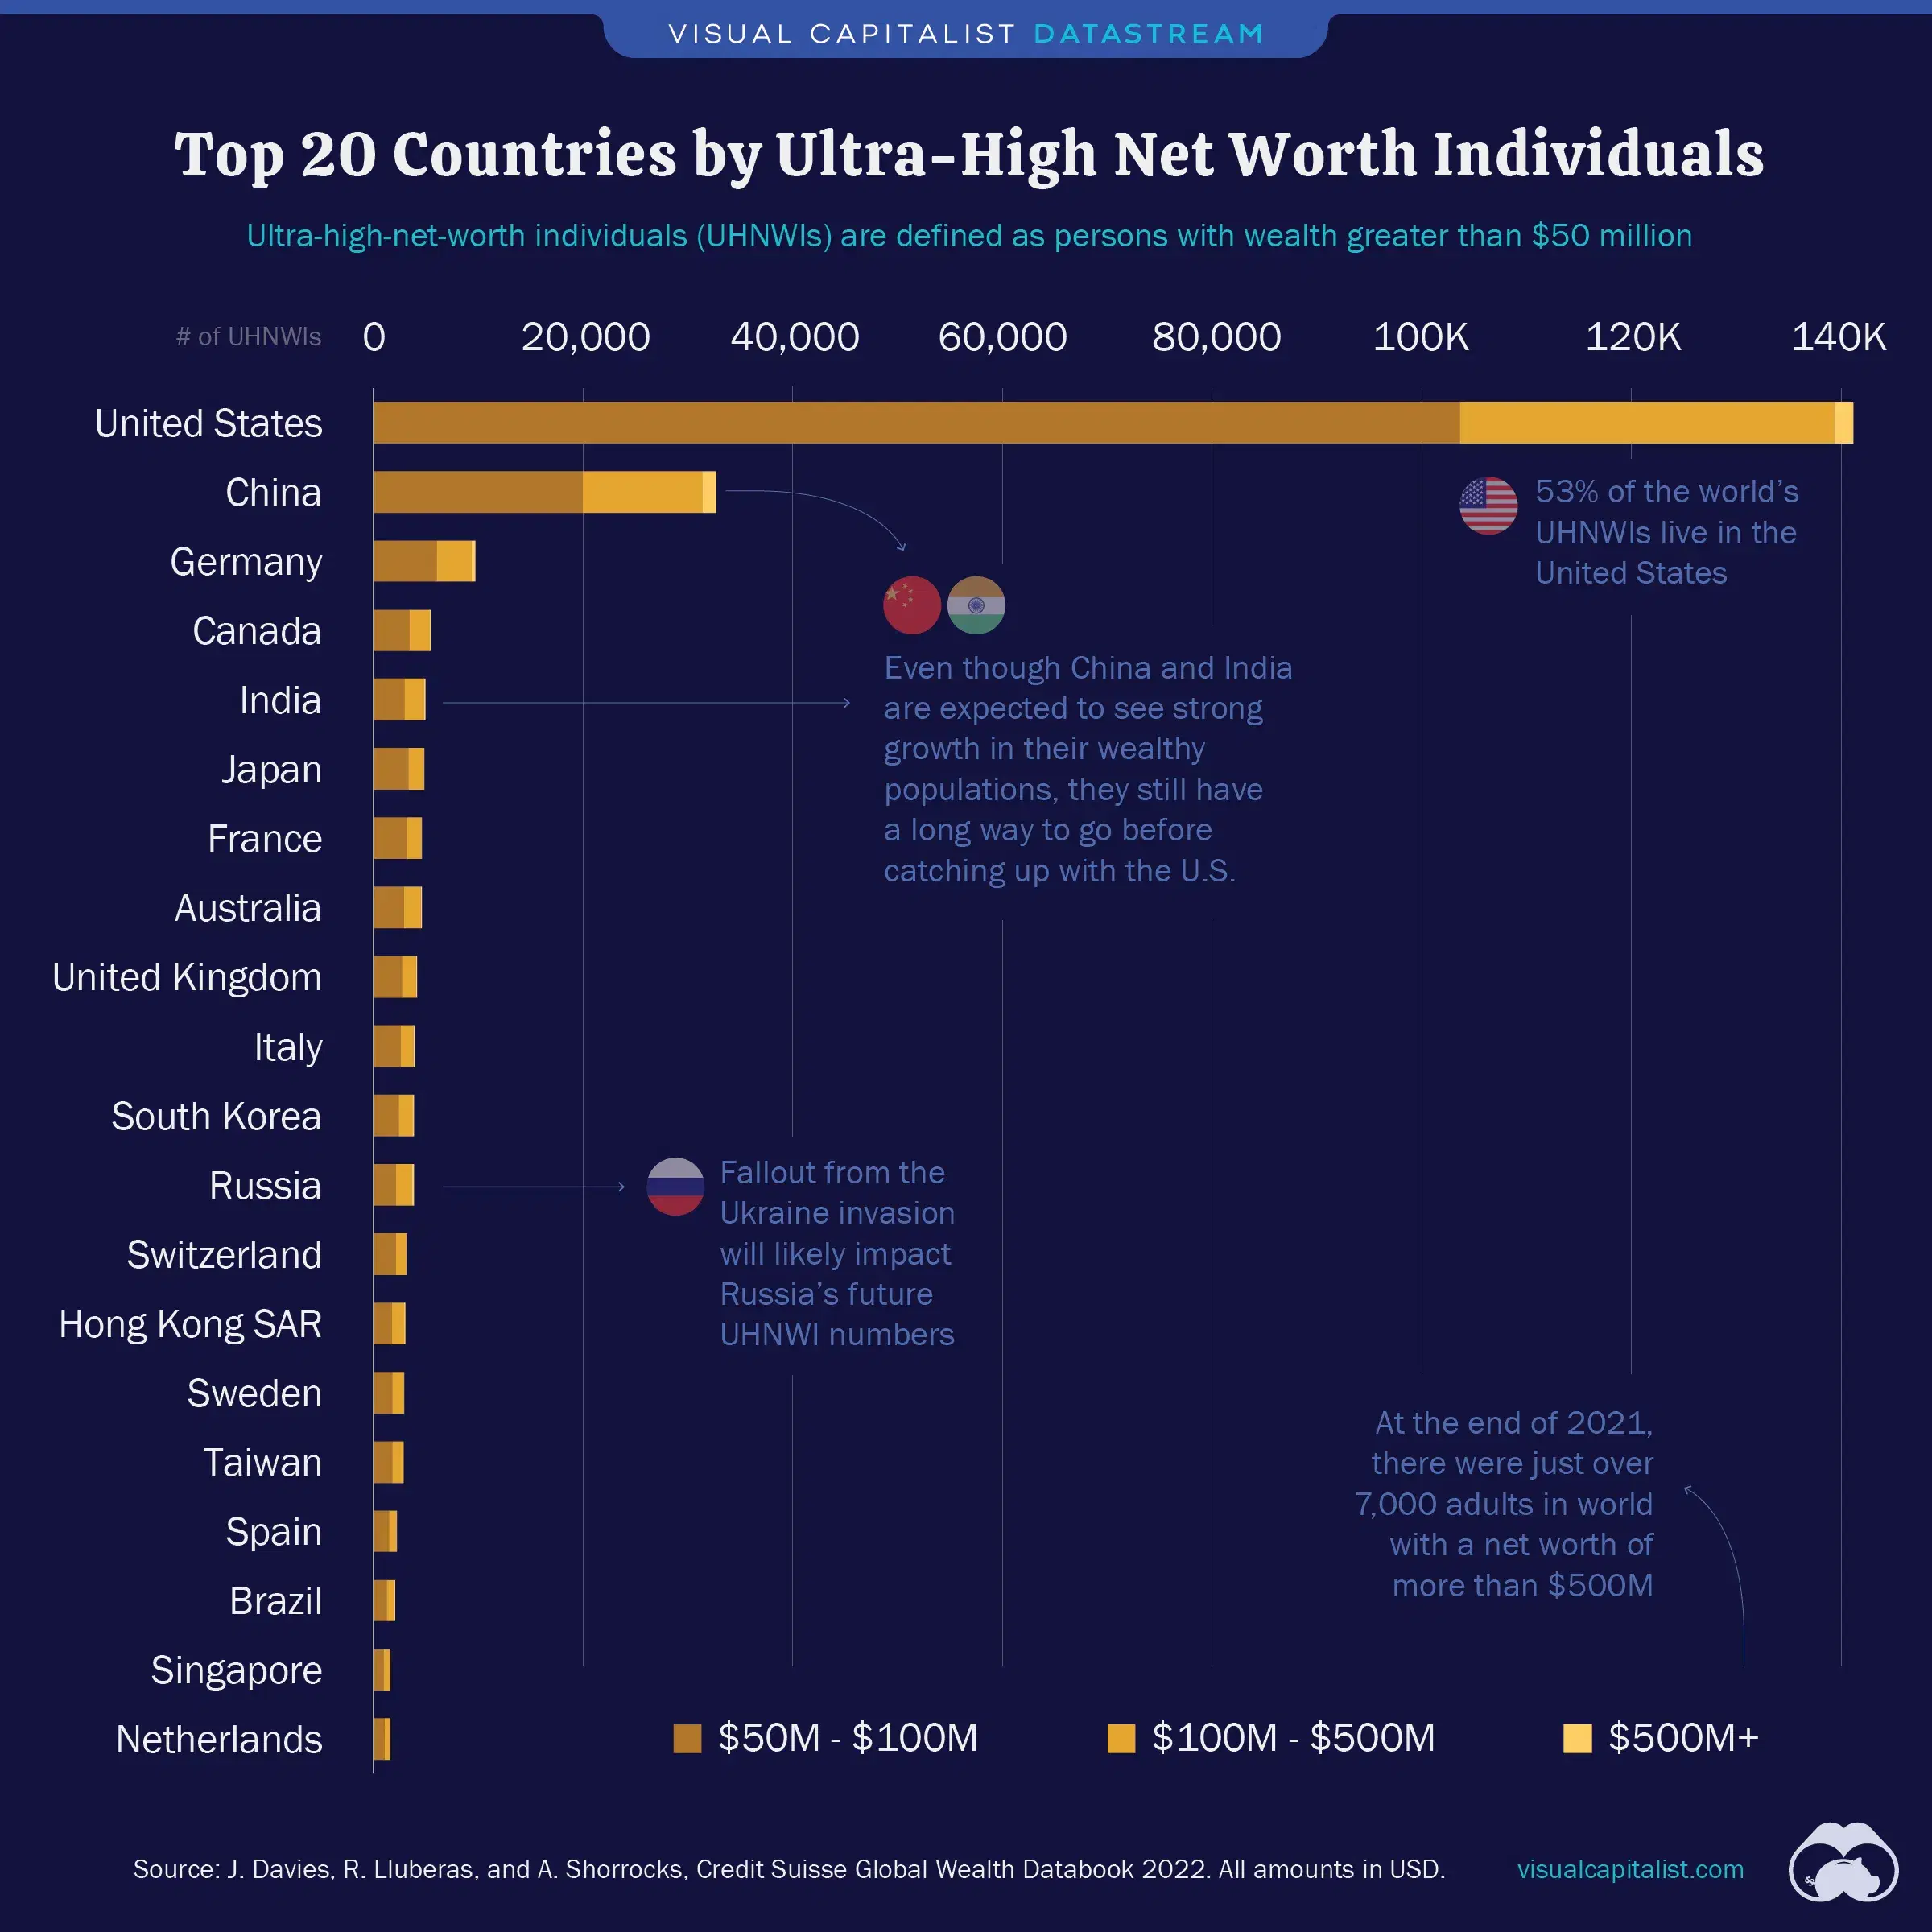 Top 20 Countries With the Most Ultra-Wealthy Individuals